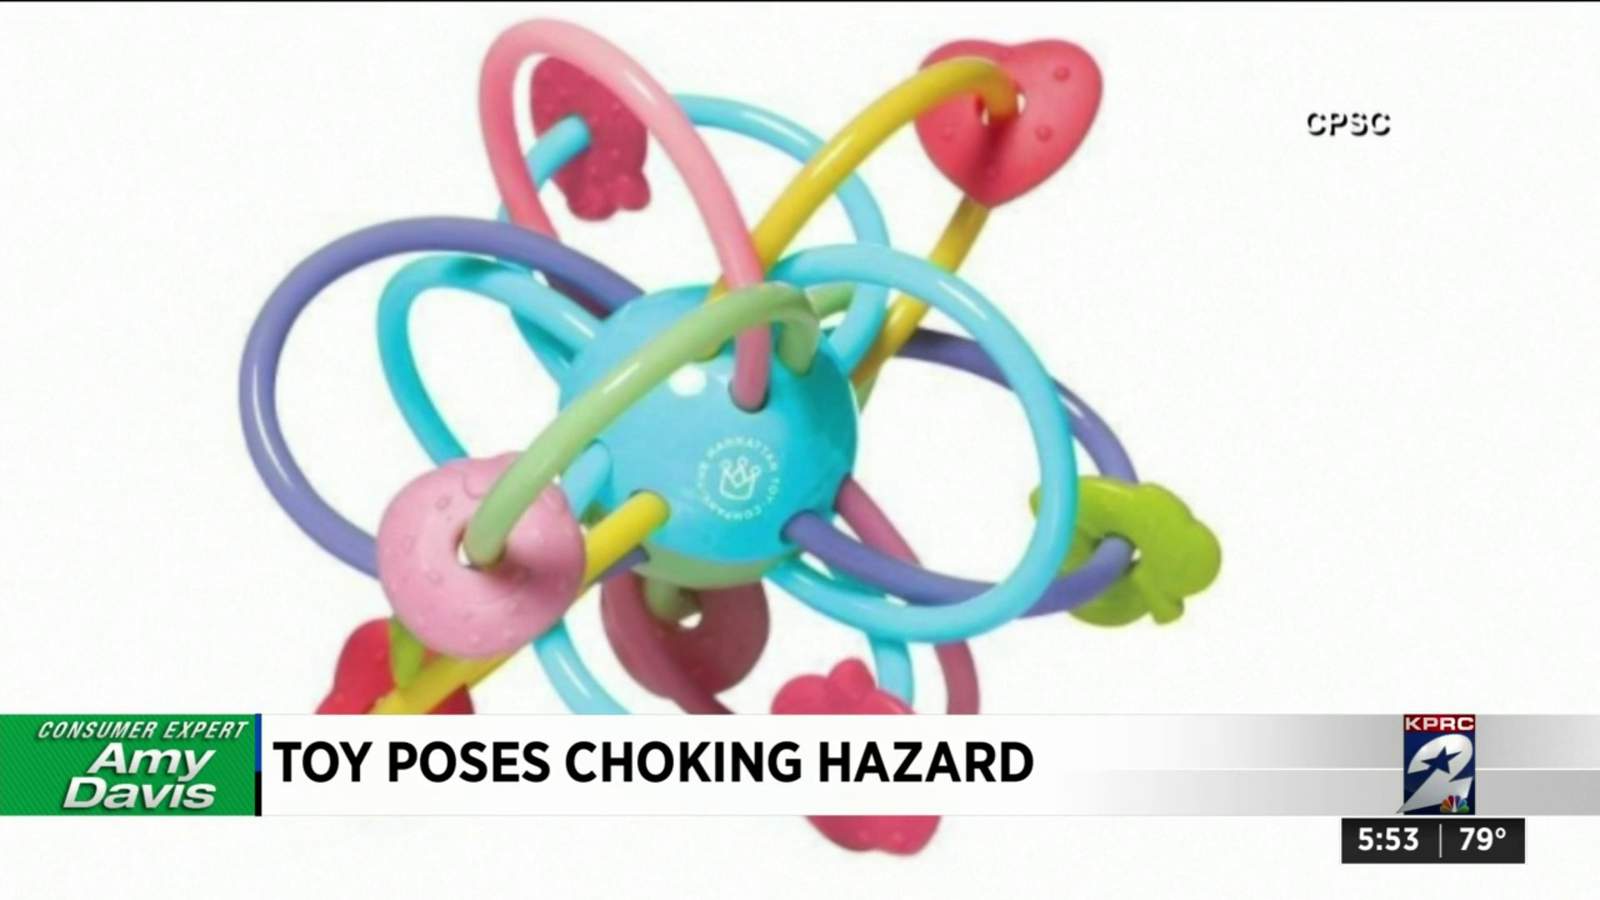 Recall: Manhattan Ball and teether toy can choke your child